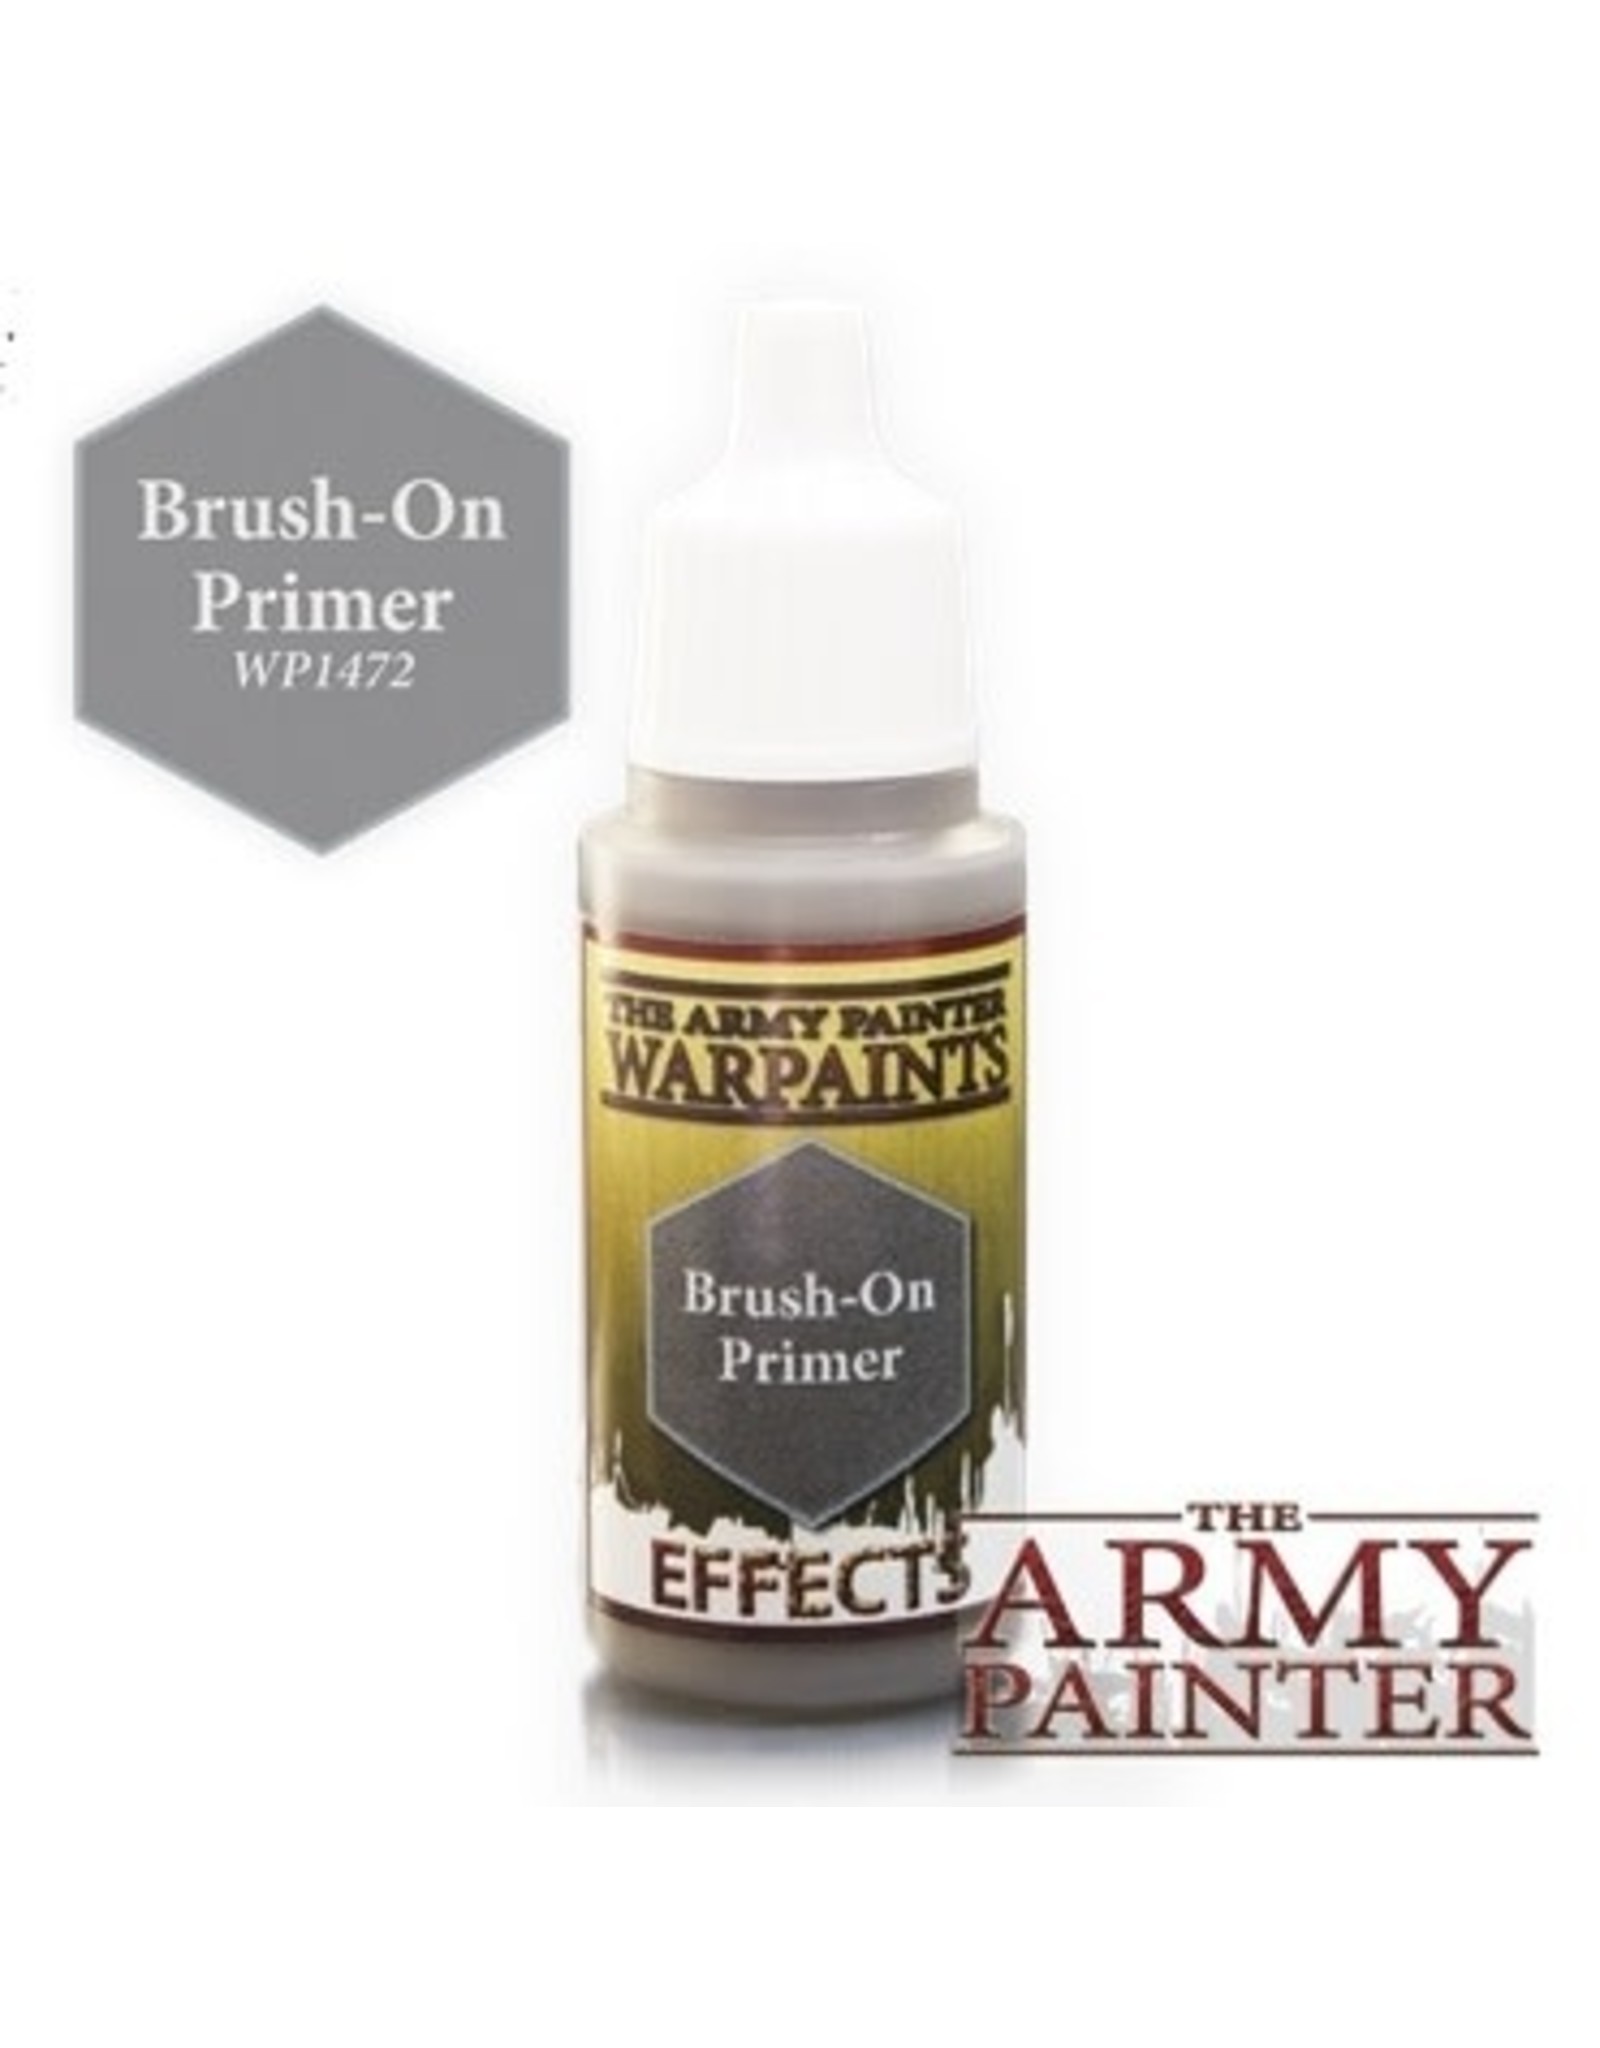 Army Painter Army Painter Warpaints: Brush-on Grey Primer